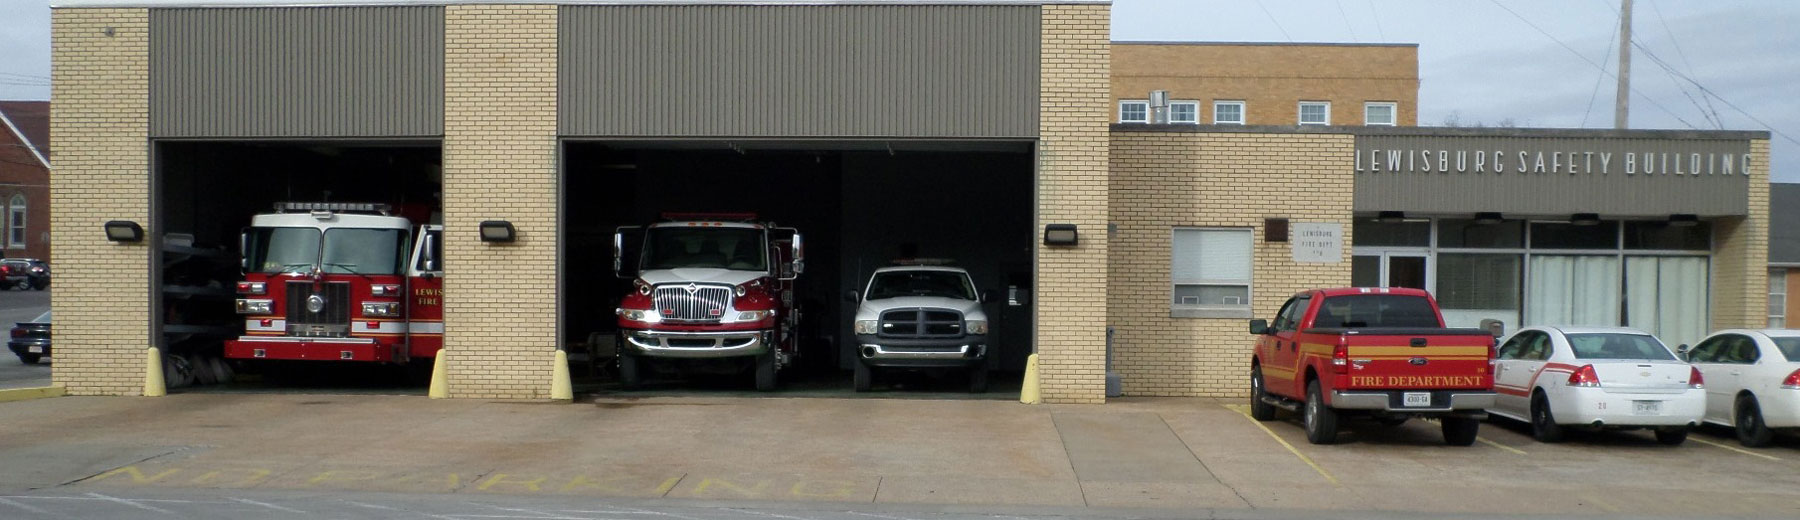 Fire Station with garage doors open